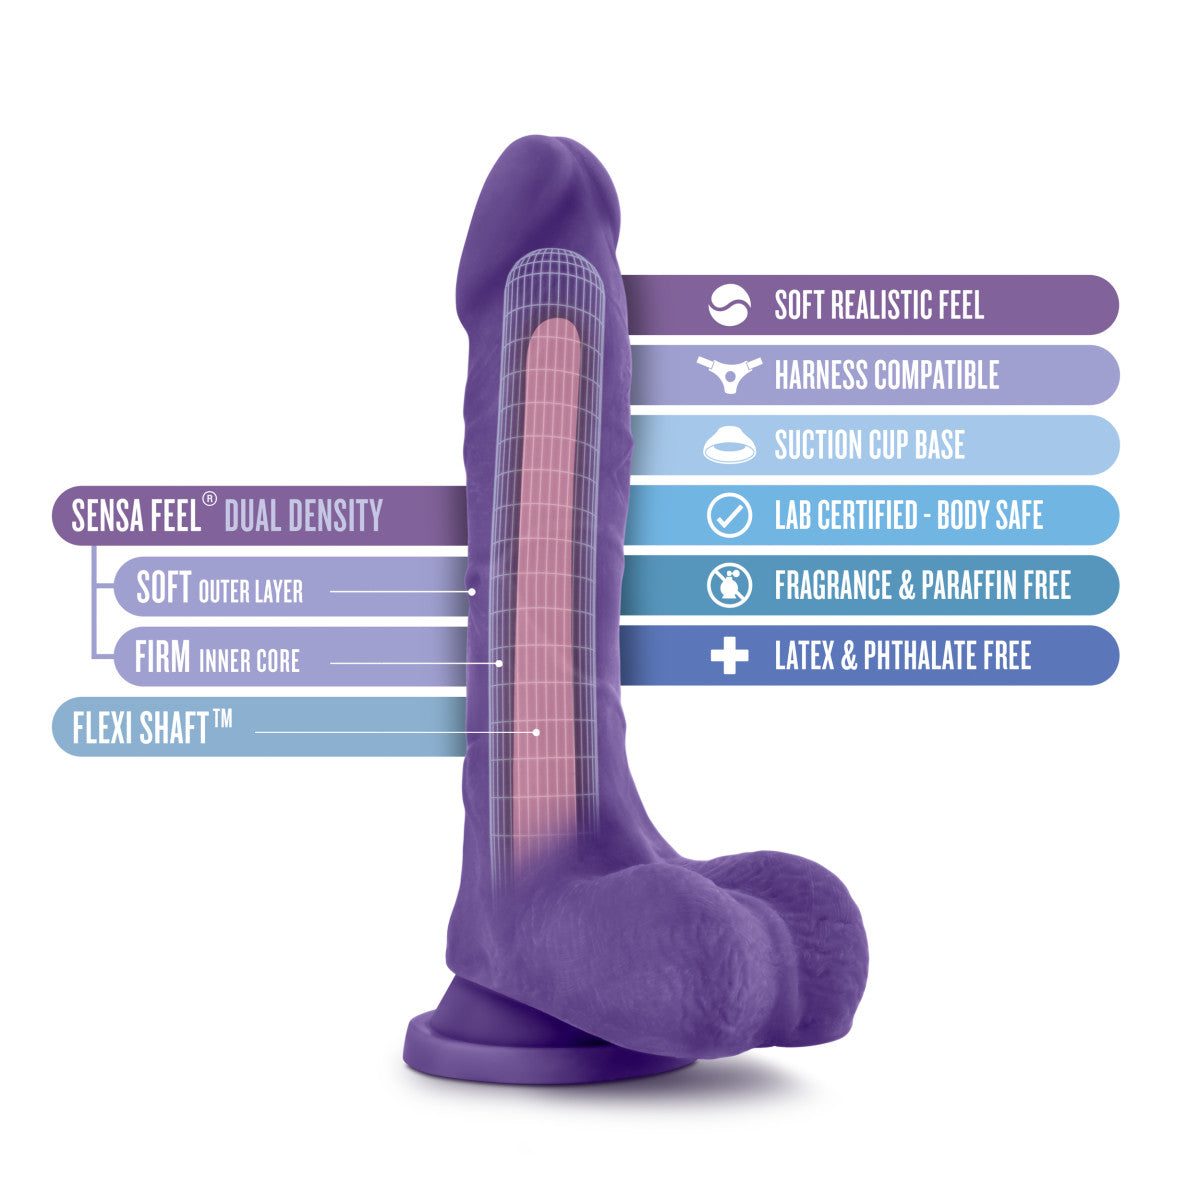 Purple realistic dildo featuring a slightly tapered head, veins along a straight but flexible shaft, and realistic balls. Suction cup base. Additional images show alternate angles.